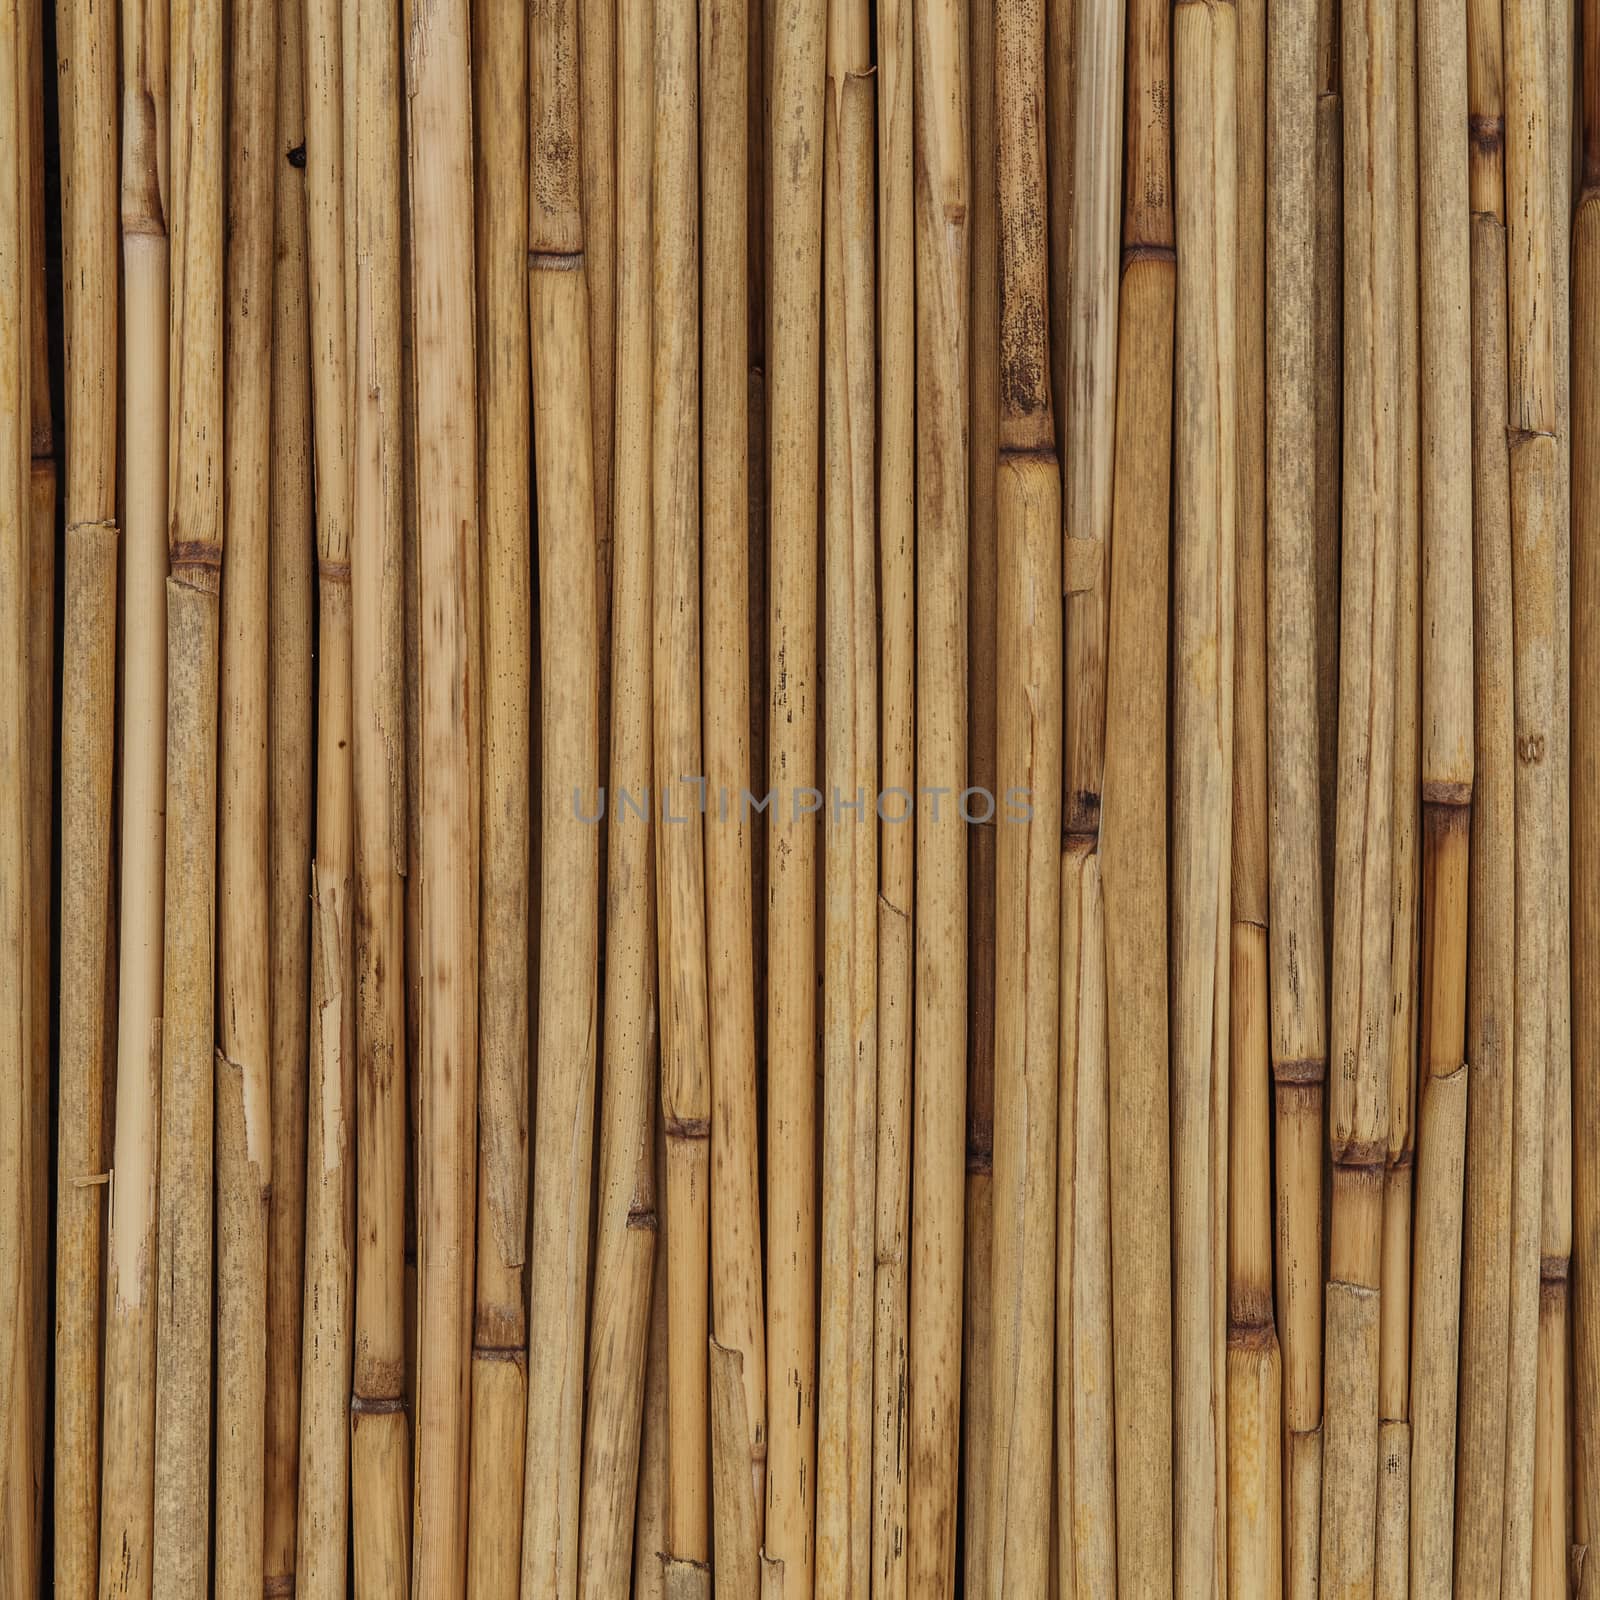 Natural Texture of reeds or bamboo for background